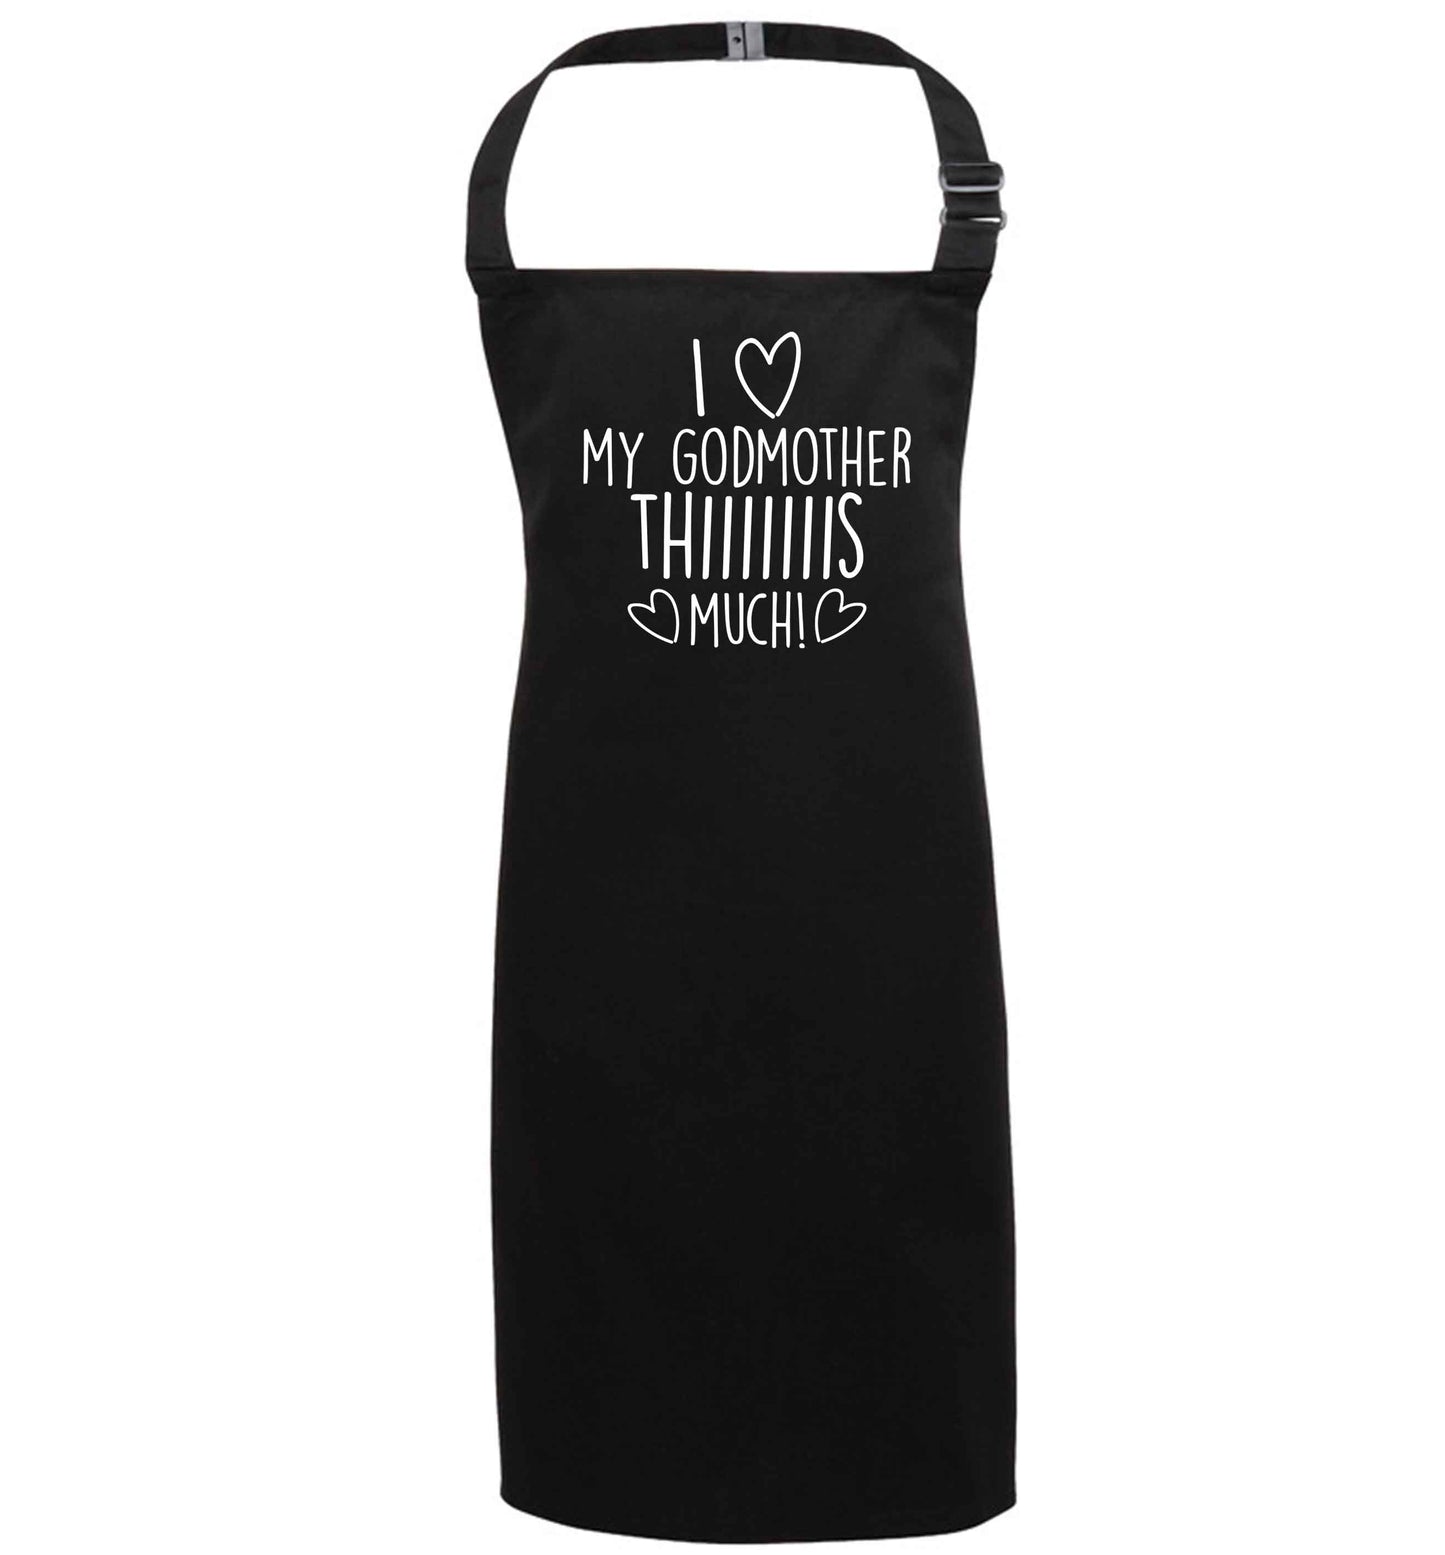 I love my Godmother this much black apron 7-10 years